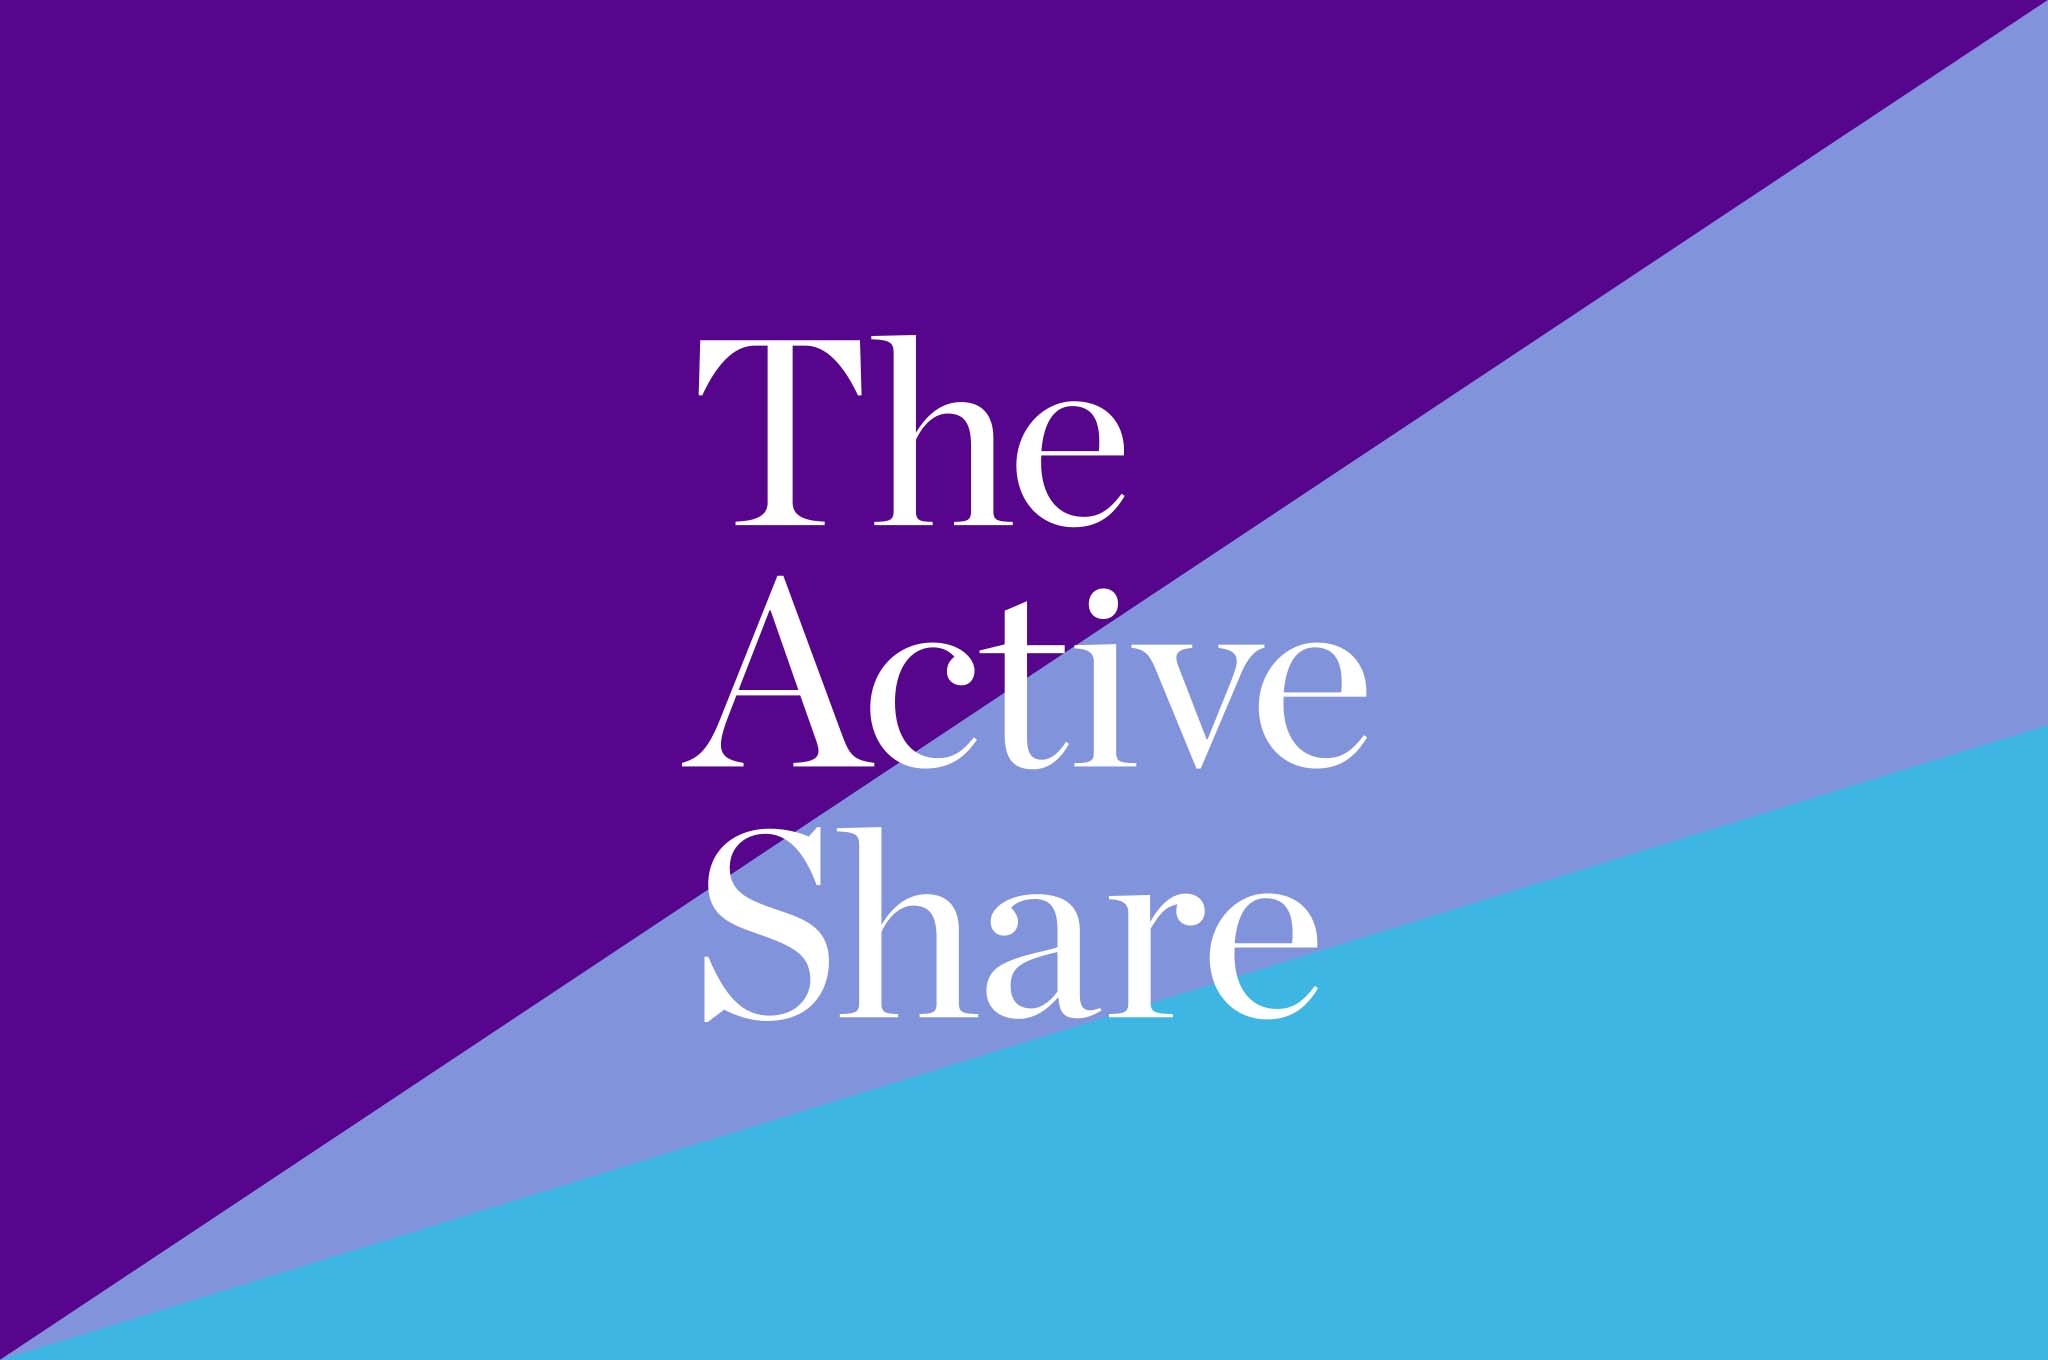 The Active Share